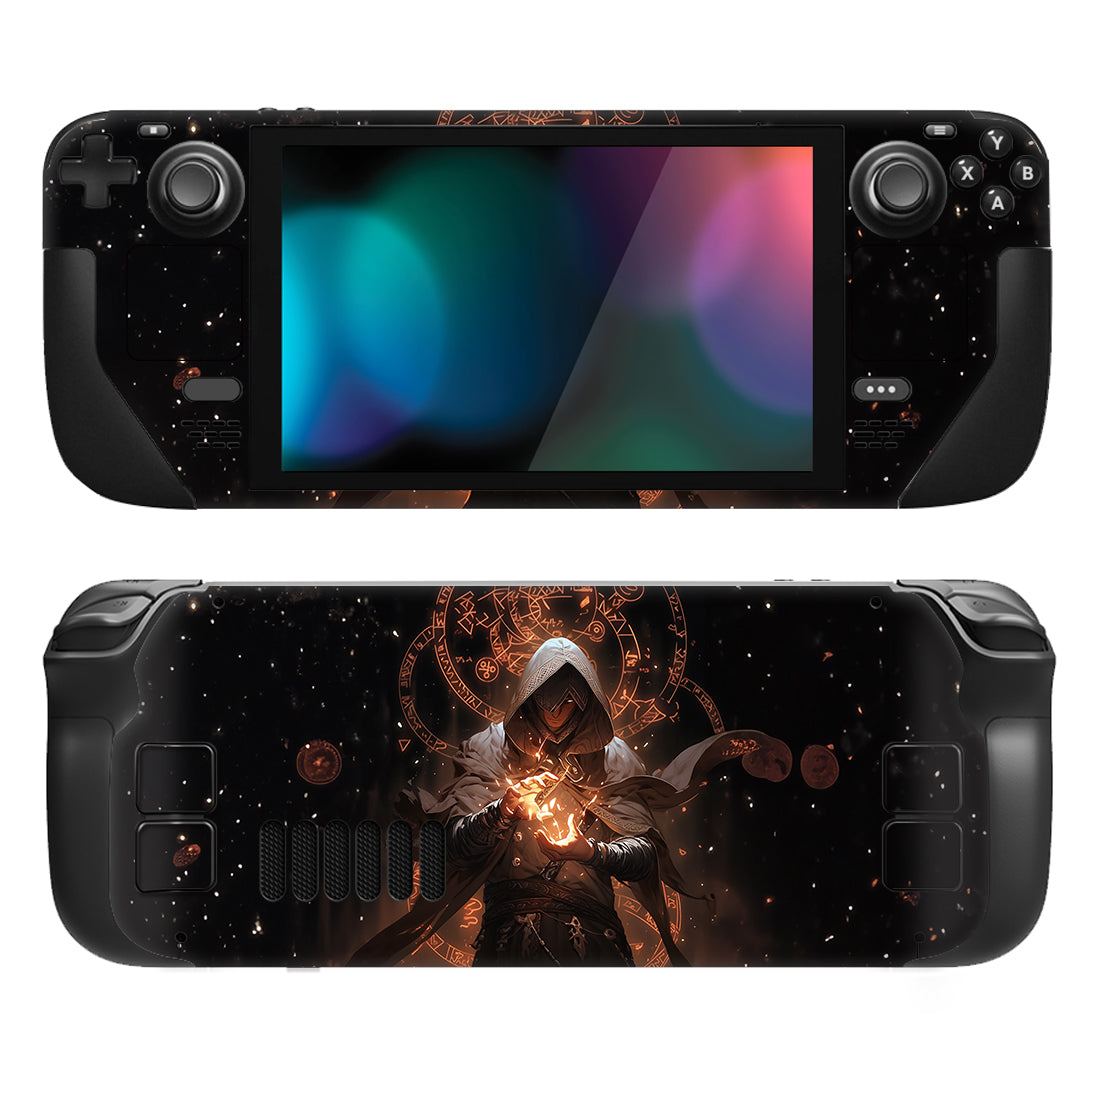 PlayVital Full Set Protective Skin Decal for Steam Deck, Custom Stickers Vinyl Cover for Steam Deck Handheld Gaming PC - Summon of Flame - SDTM078 PlayVital